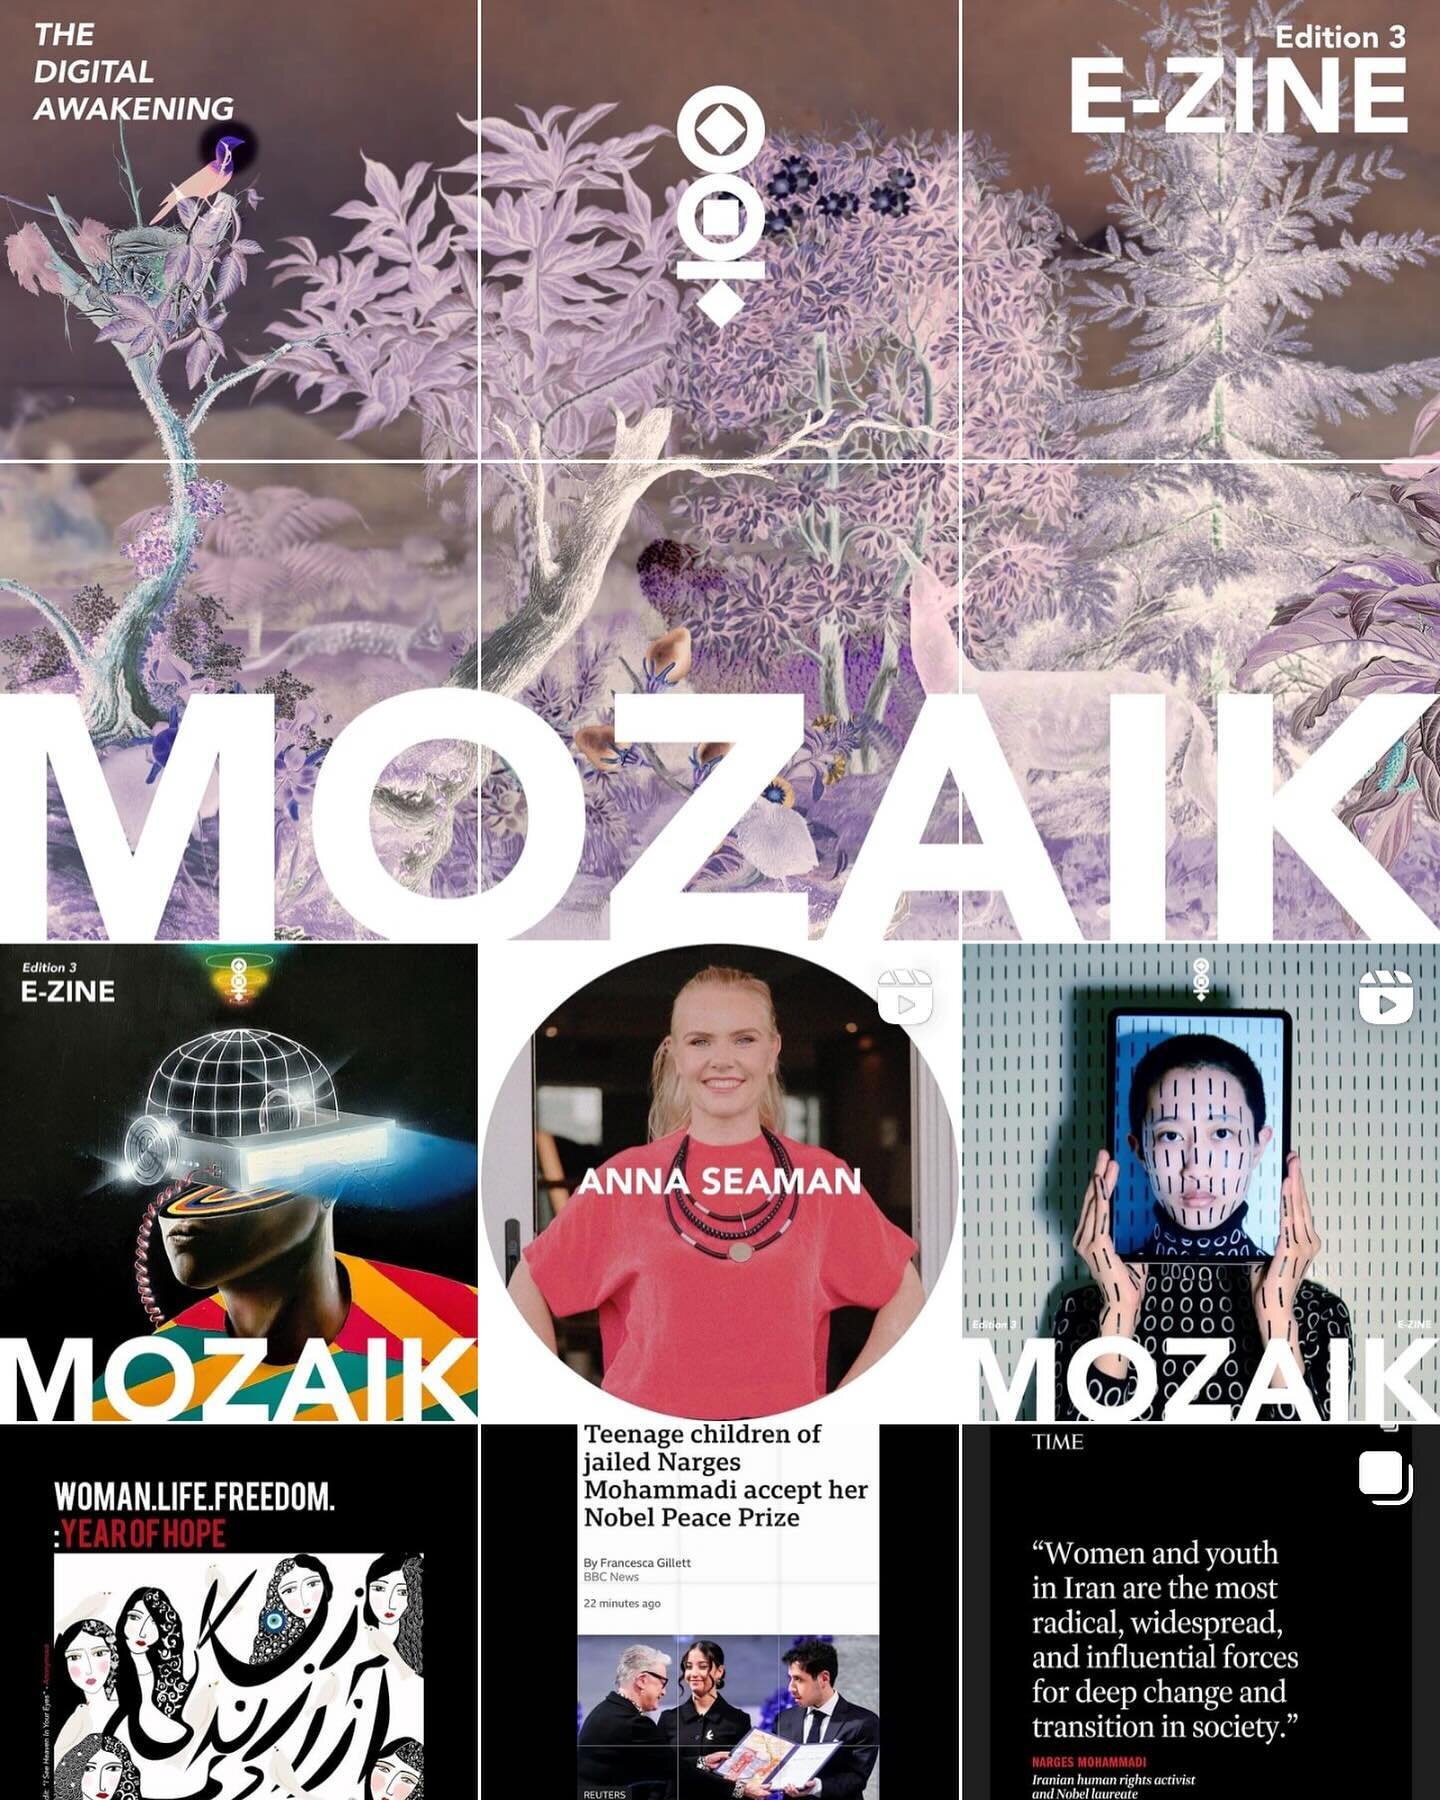 Thrilled to announce that I was selected for the 3rd edition of the @mozaikphilanthropy e-zine &lsquo;The Digital Awakening&rsquo;. 

For the Future Art Writer 2023 award, my essay &ldquo;The Machine in the Mirror: When technology asks us to consider